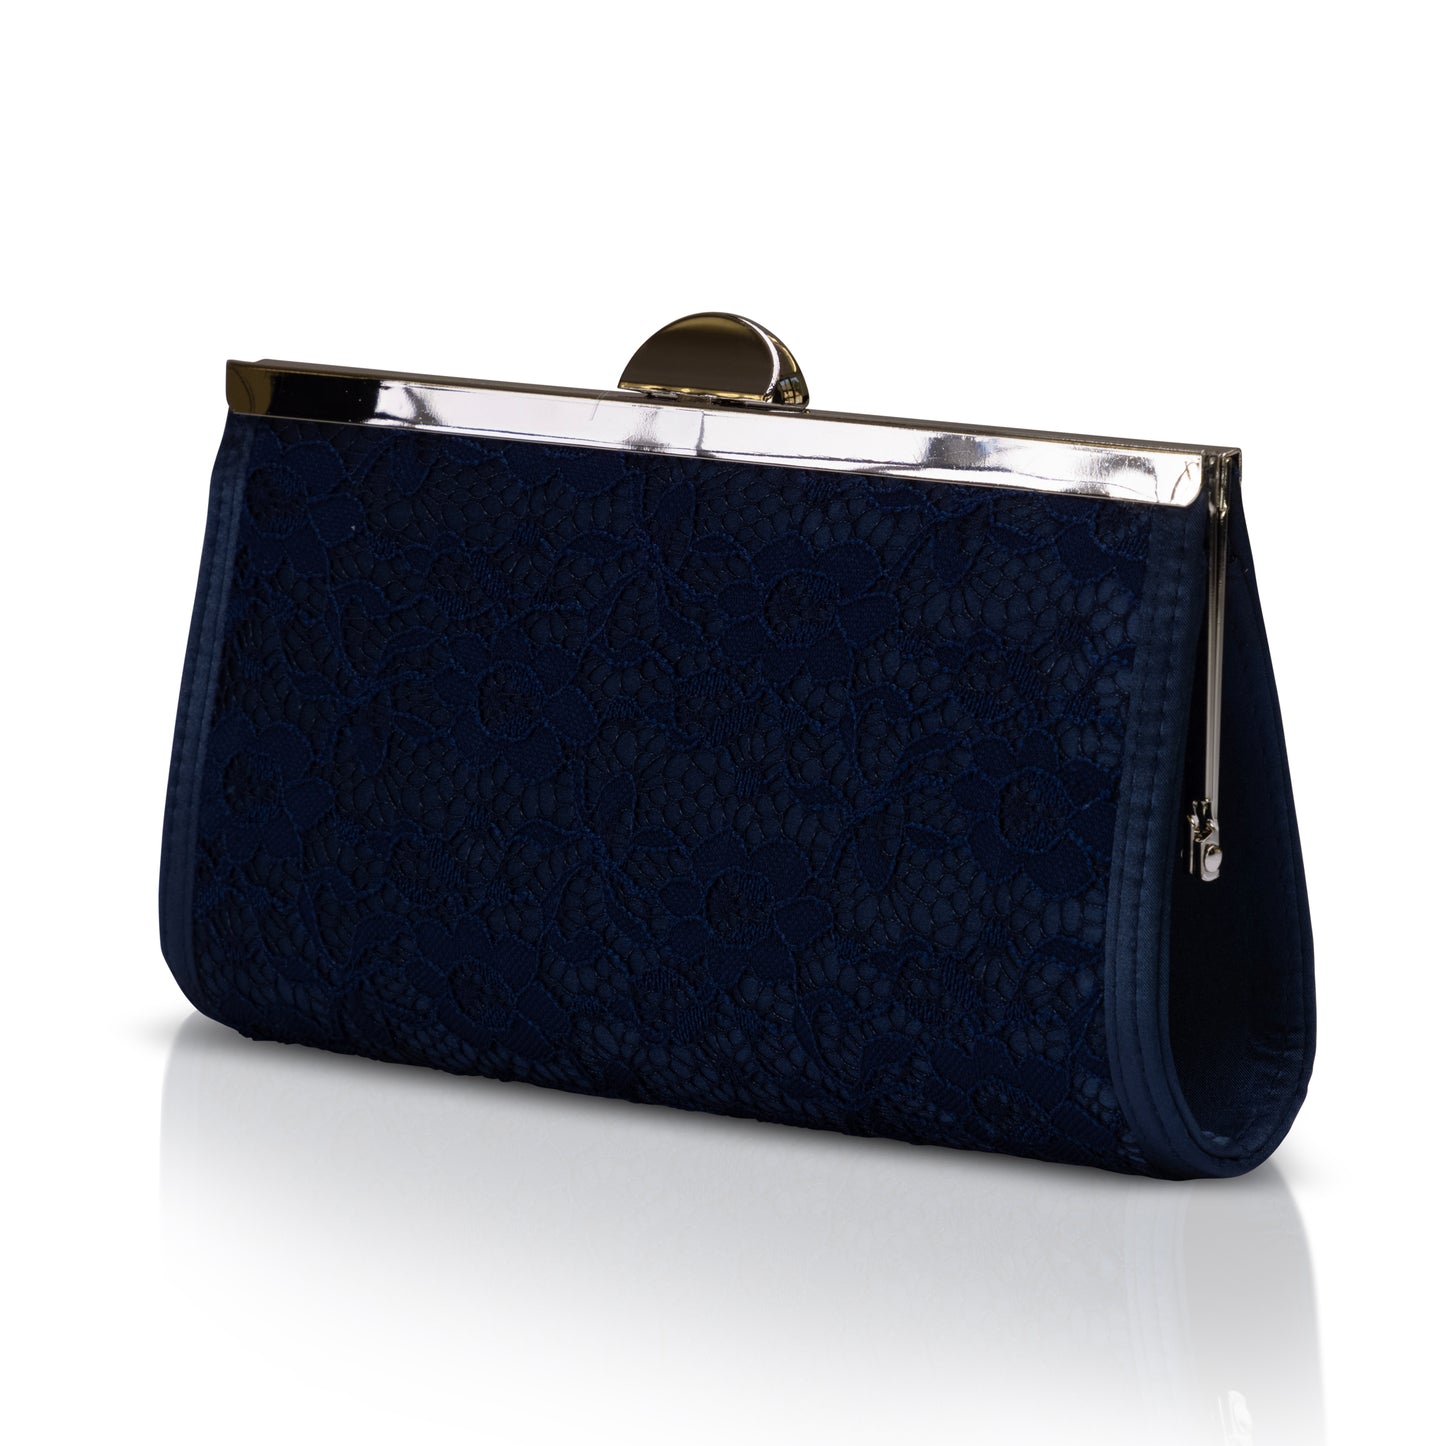 Willow navy lace clutch bag